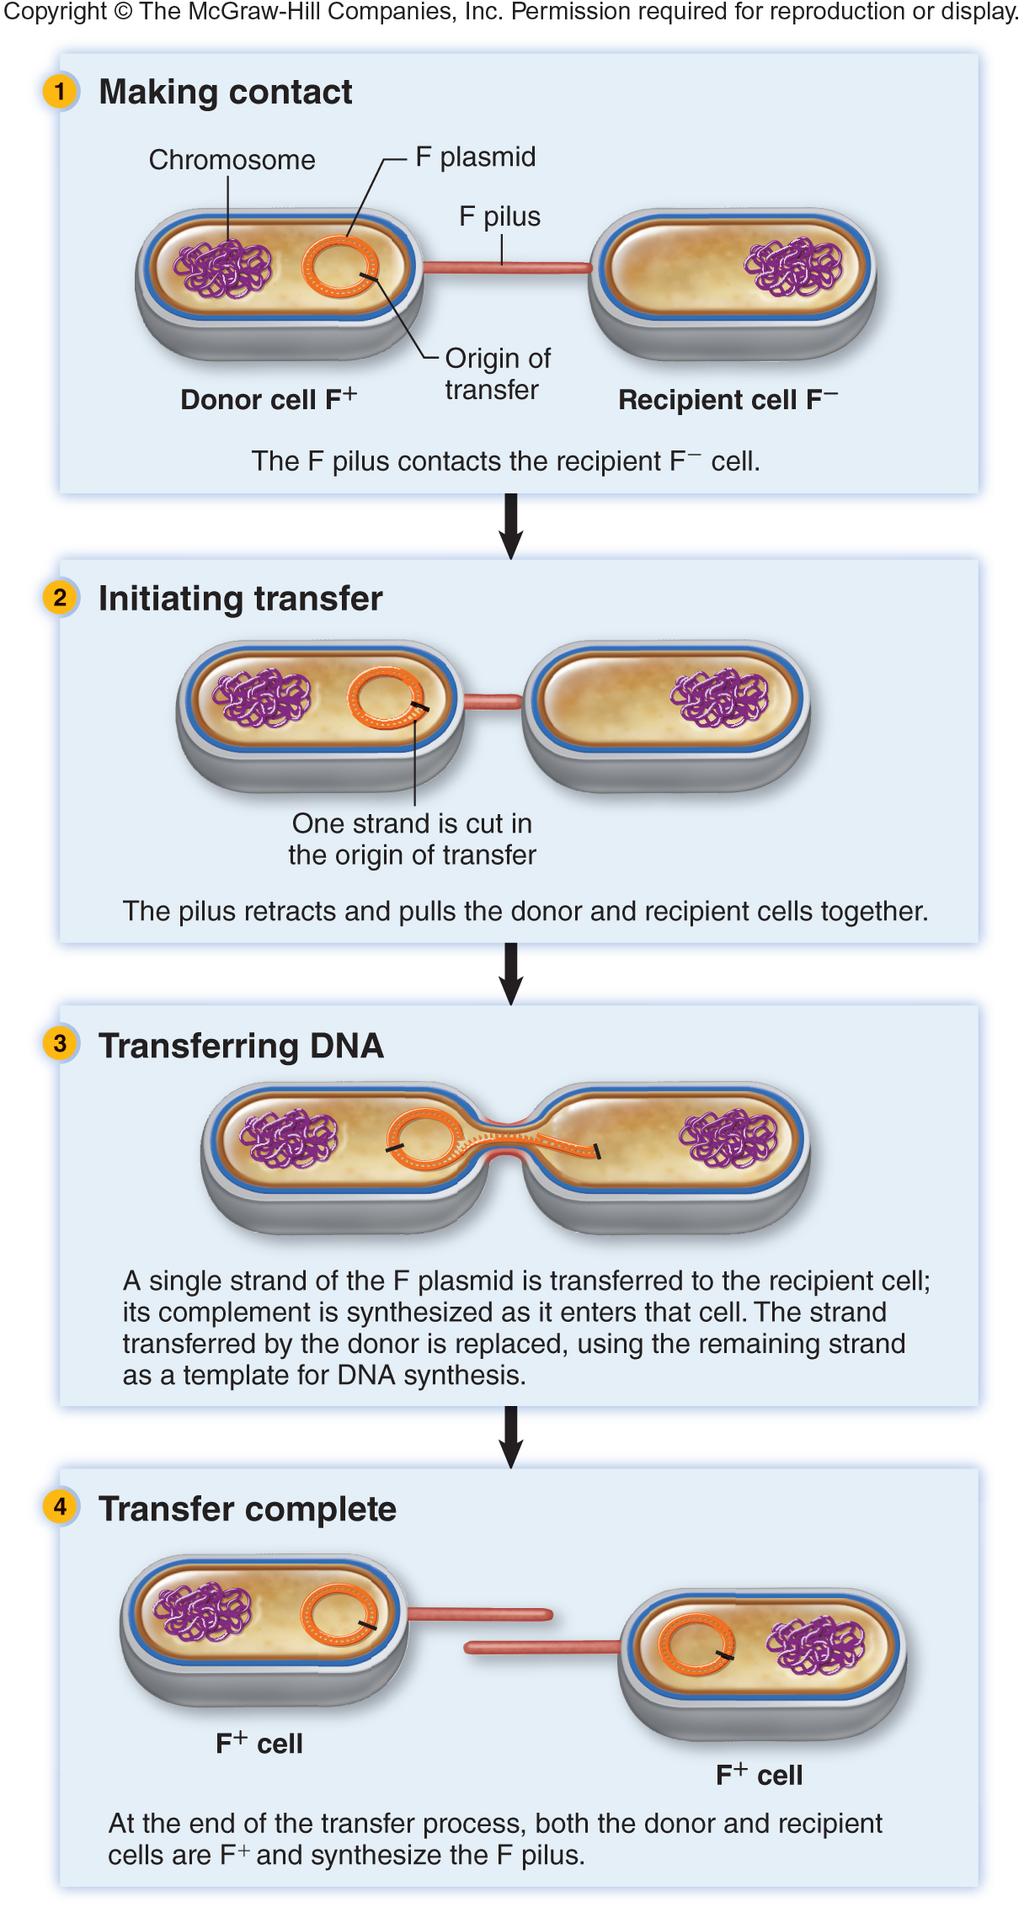 ! Without the OoT, DN can not be moved using the F pilus. The OoT is nicked to open the DN and one single strand of the plasmid moves through the pilus to the other cell.